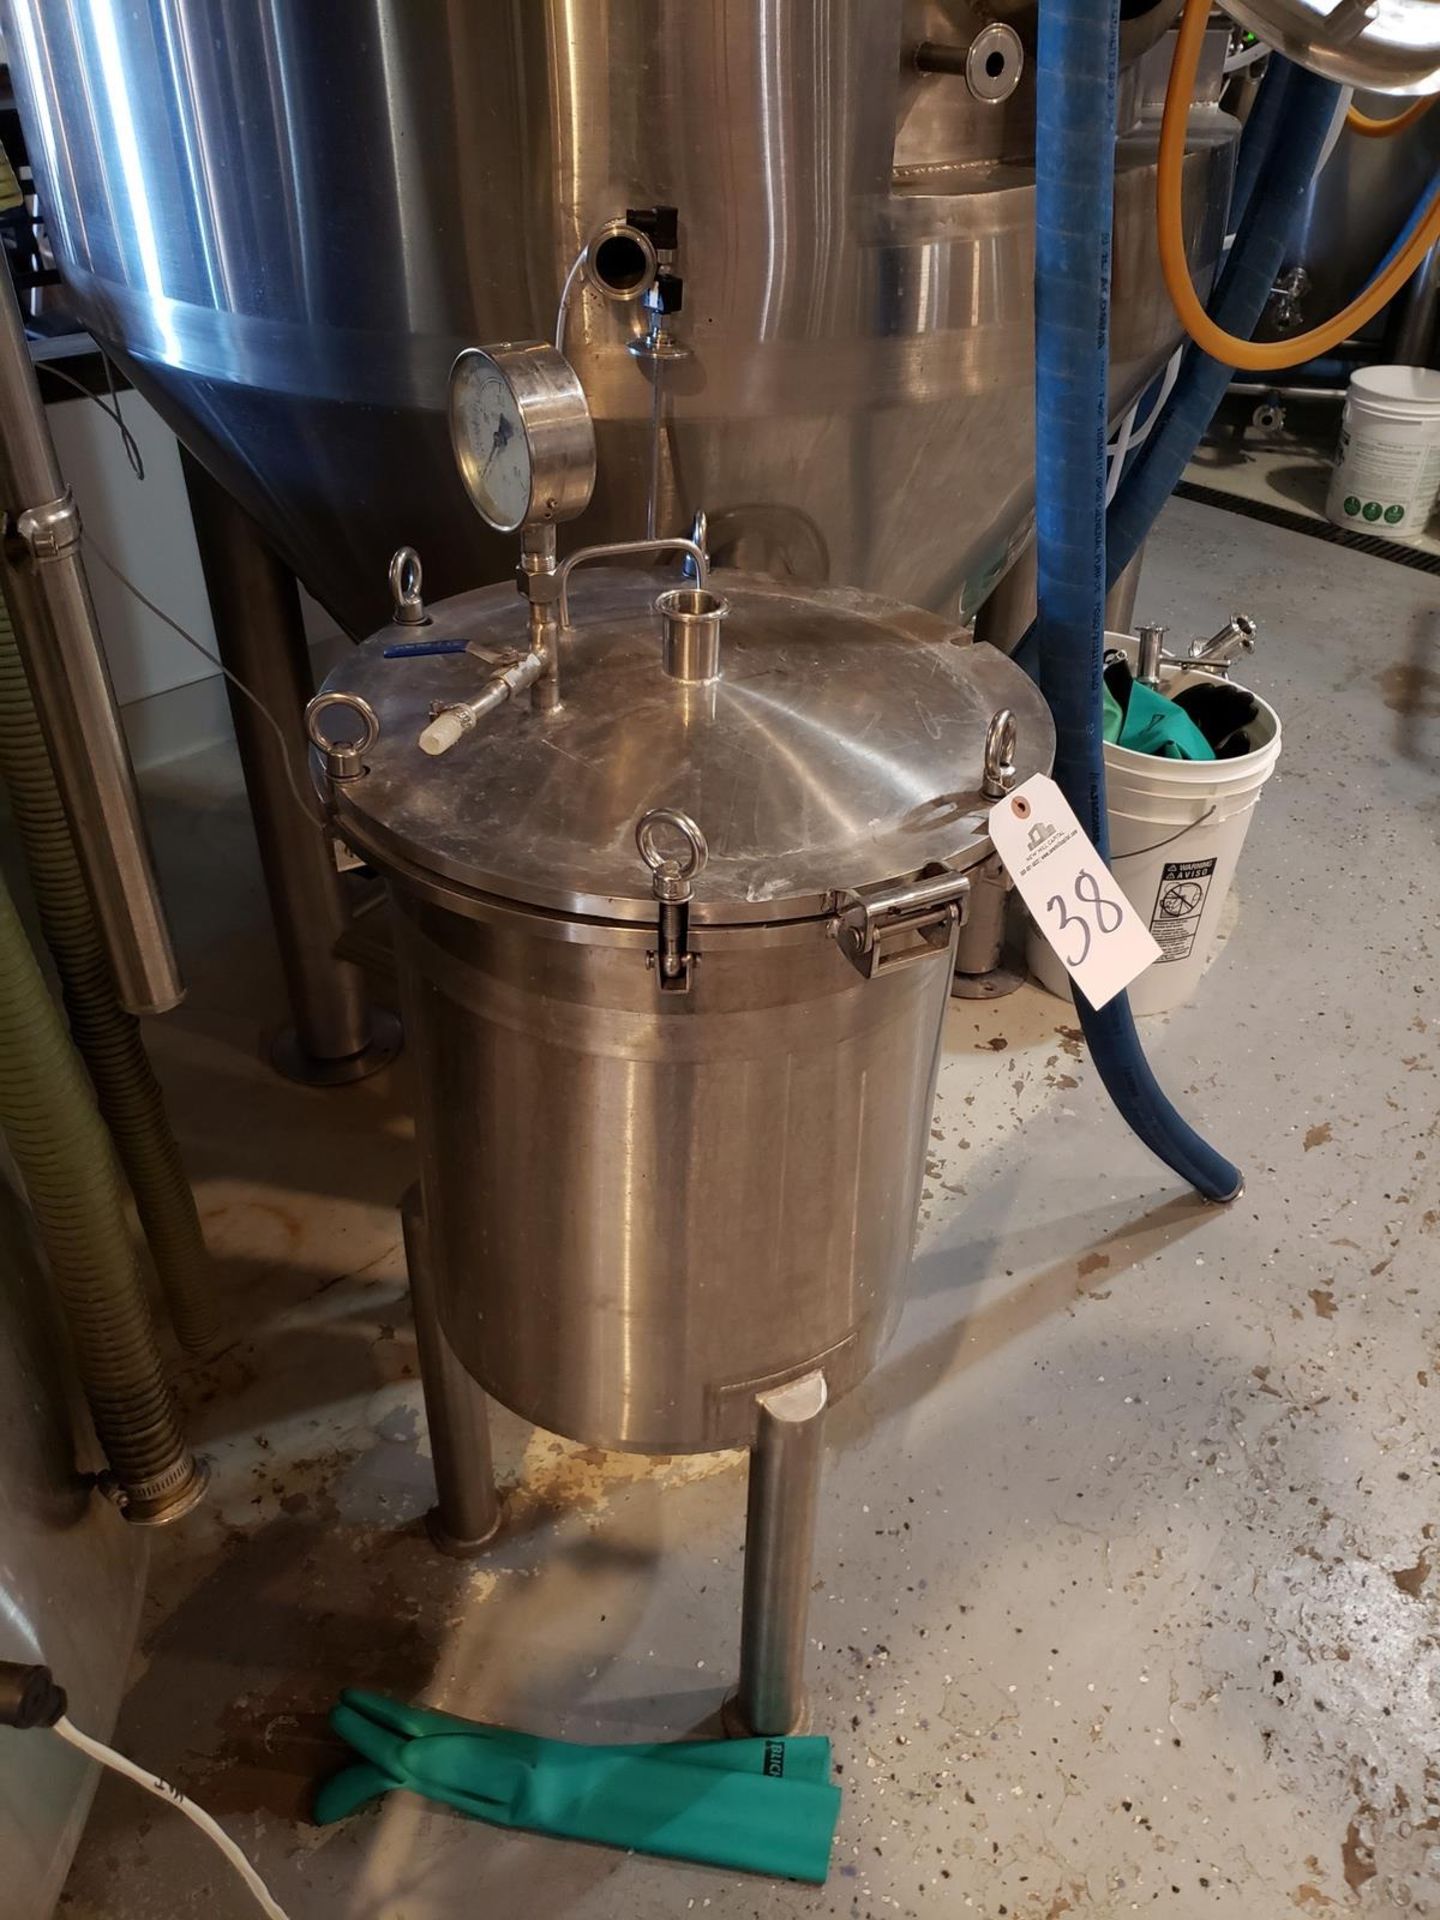 Stainless Steel 10 Gallon Reactor Tank | Rig Fee: Buyer to Remove or Contact Rigger